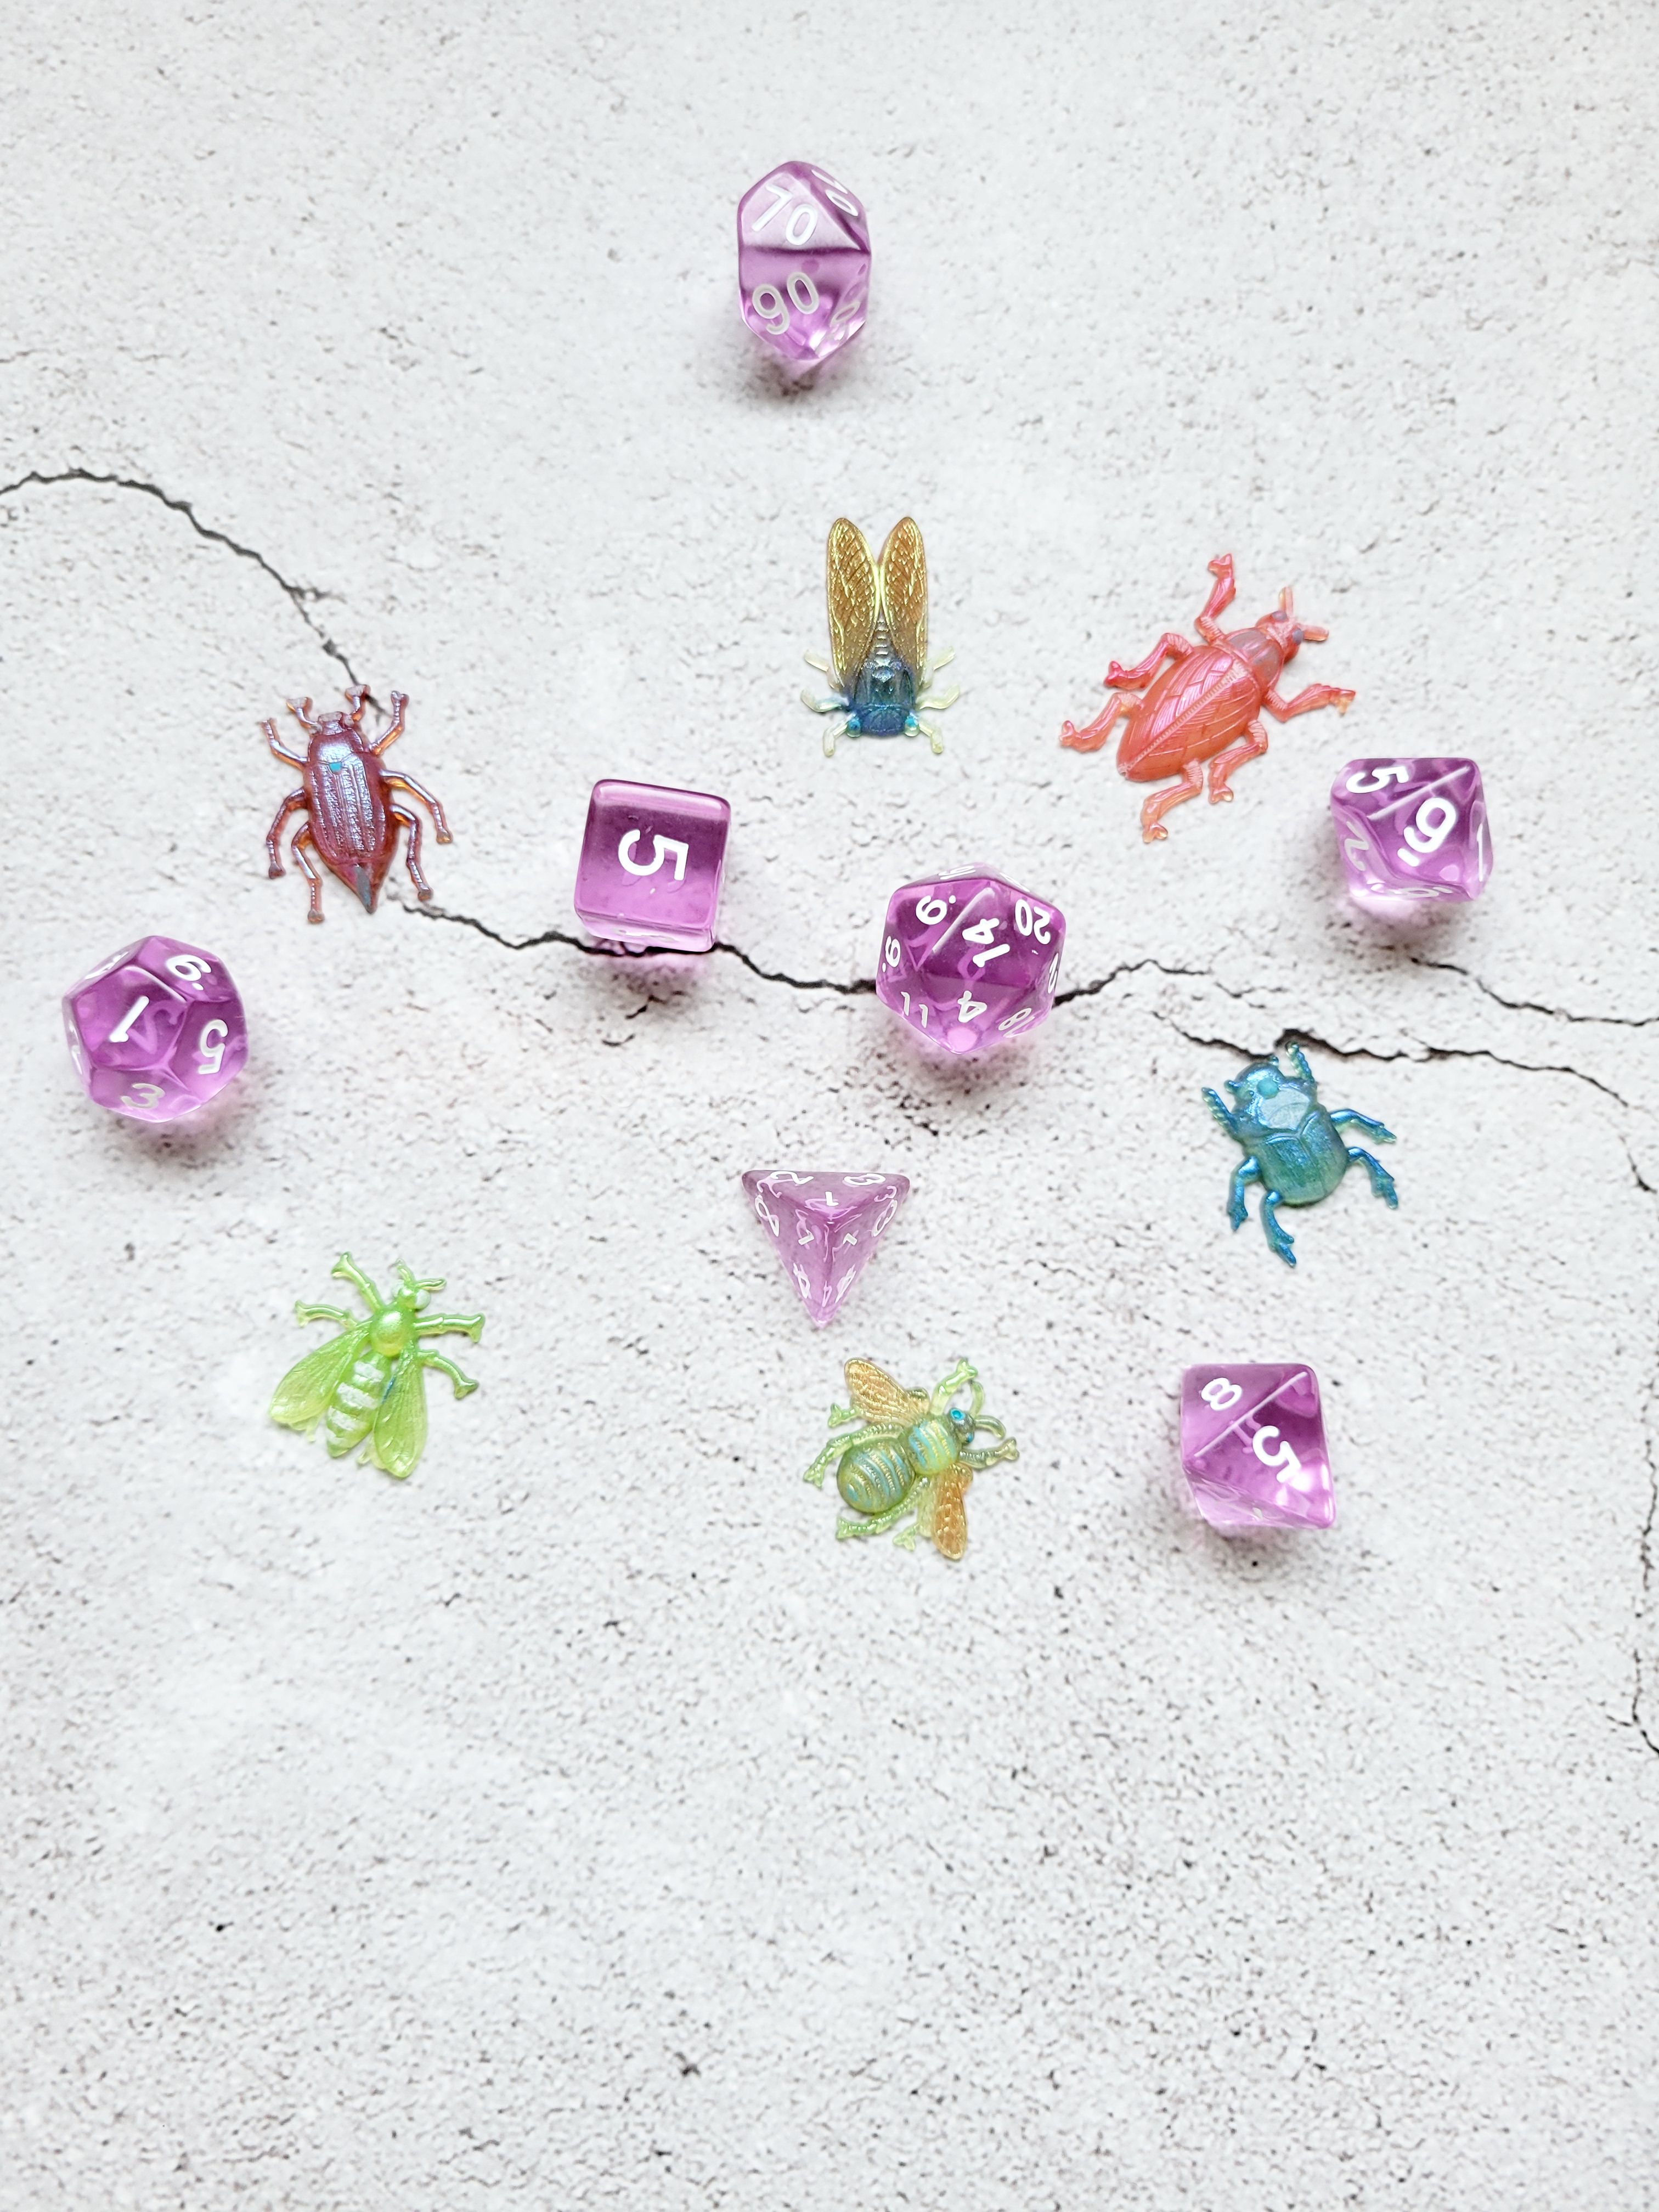 A birds eye view of a group of six various bugs. A peach beetle with pale blue painted eyes. A shimmering blue beetle. A lime green wasp. A green bee with blue eyes and yellow wings. A dark pink beetle with blue accents. A blue and gold cicada. They are encircled around a set of translucent purple standard D&D dice for scale.